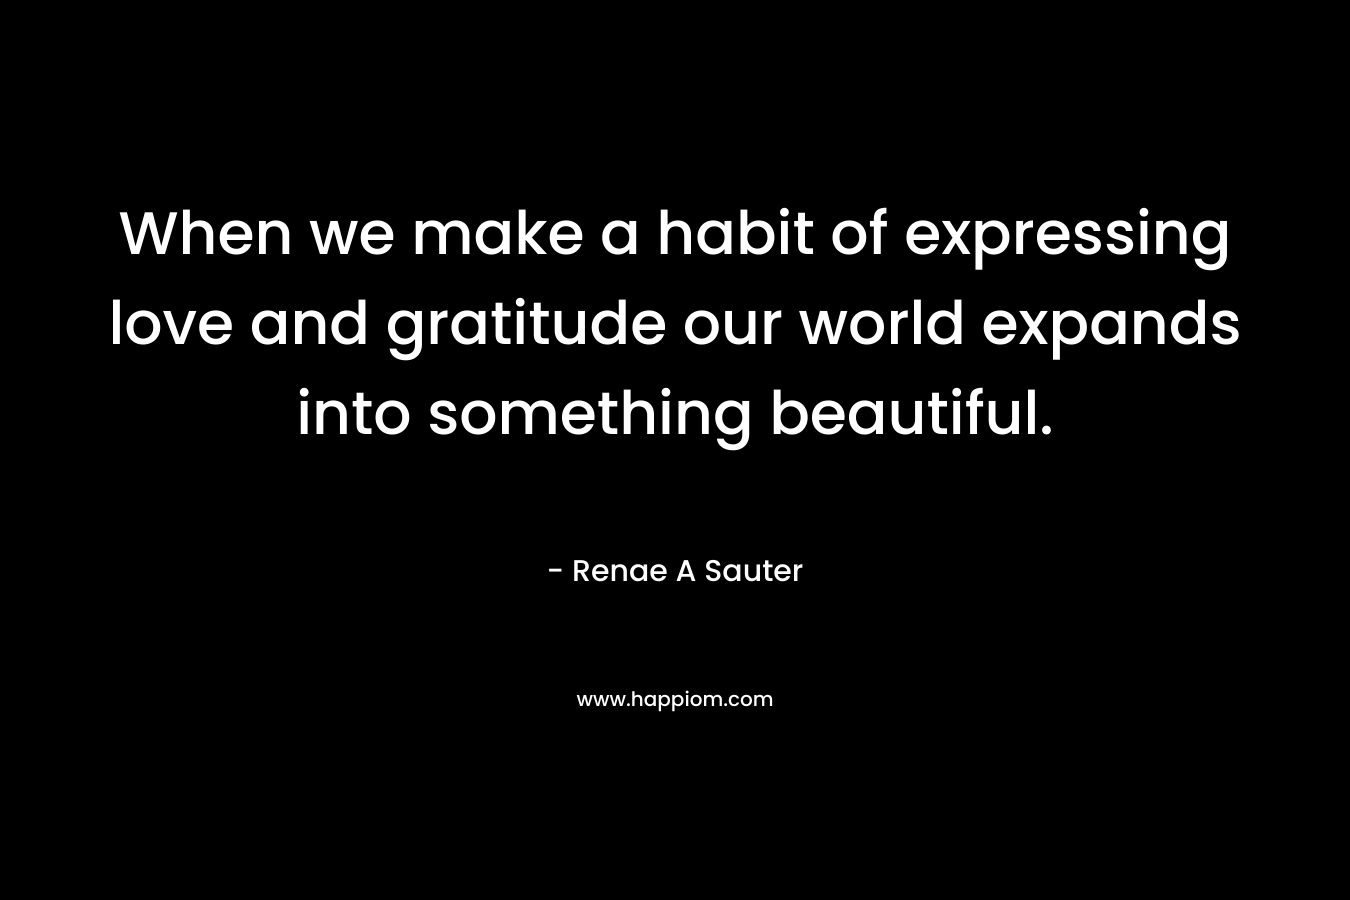 When we make a habit of expressing love and gratitude our world expands into something beautiful.